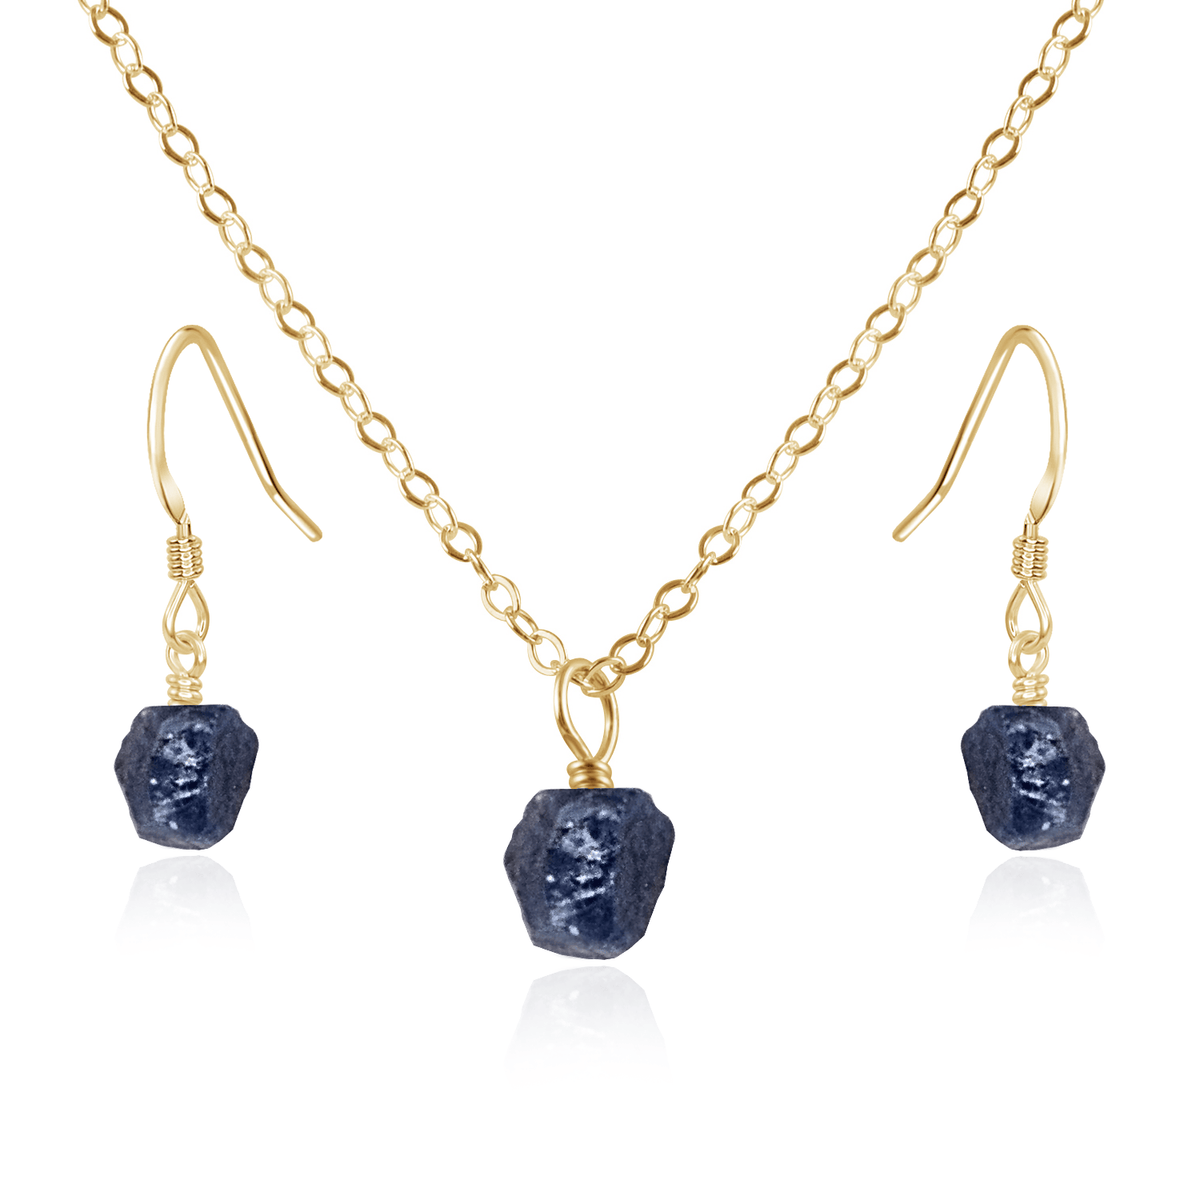 Raw Sapphire Crystal Earrings & Necklace Set - Raw Sapphire Crystal Earrings & Necklace Set - 14k Gold Fill / Cable - Luna Tide Handmade Crystal Jewellery